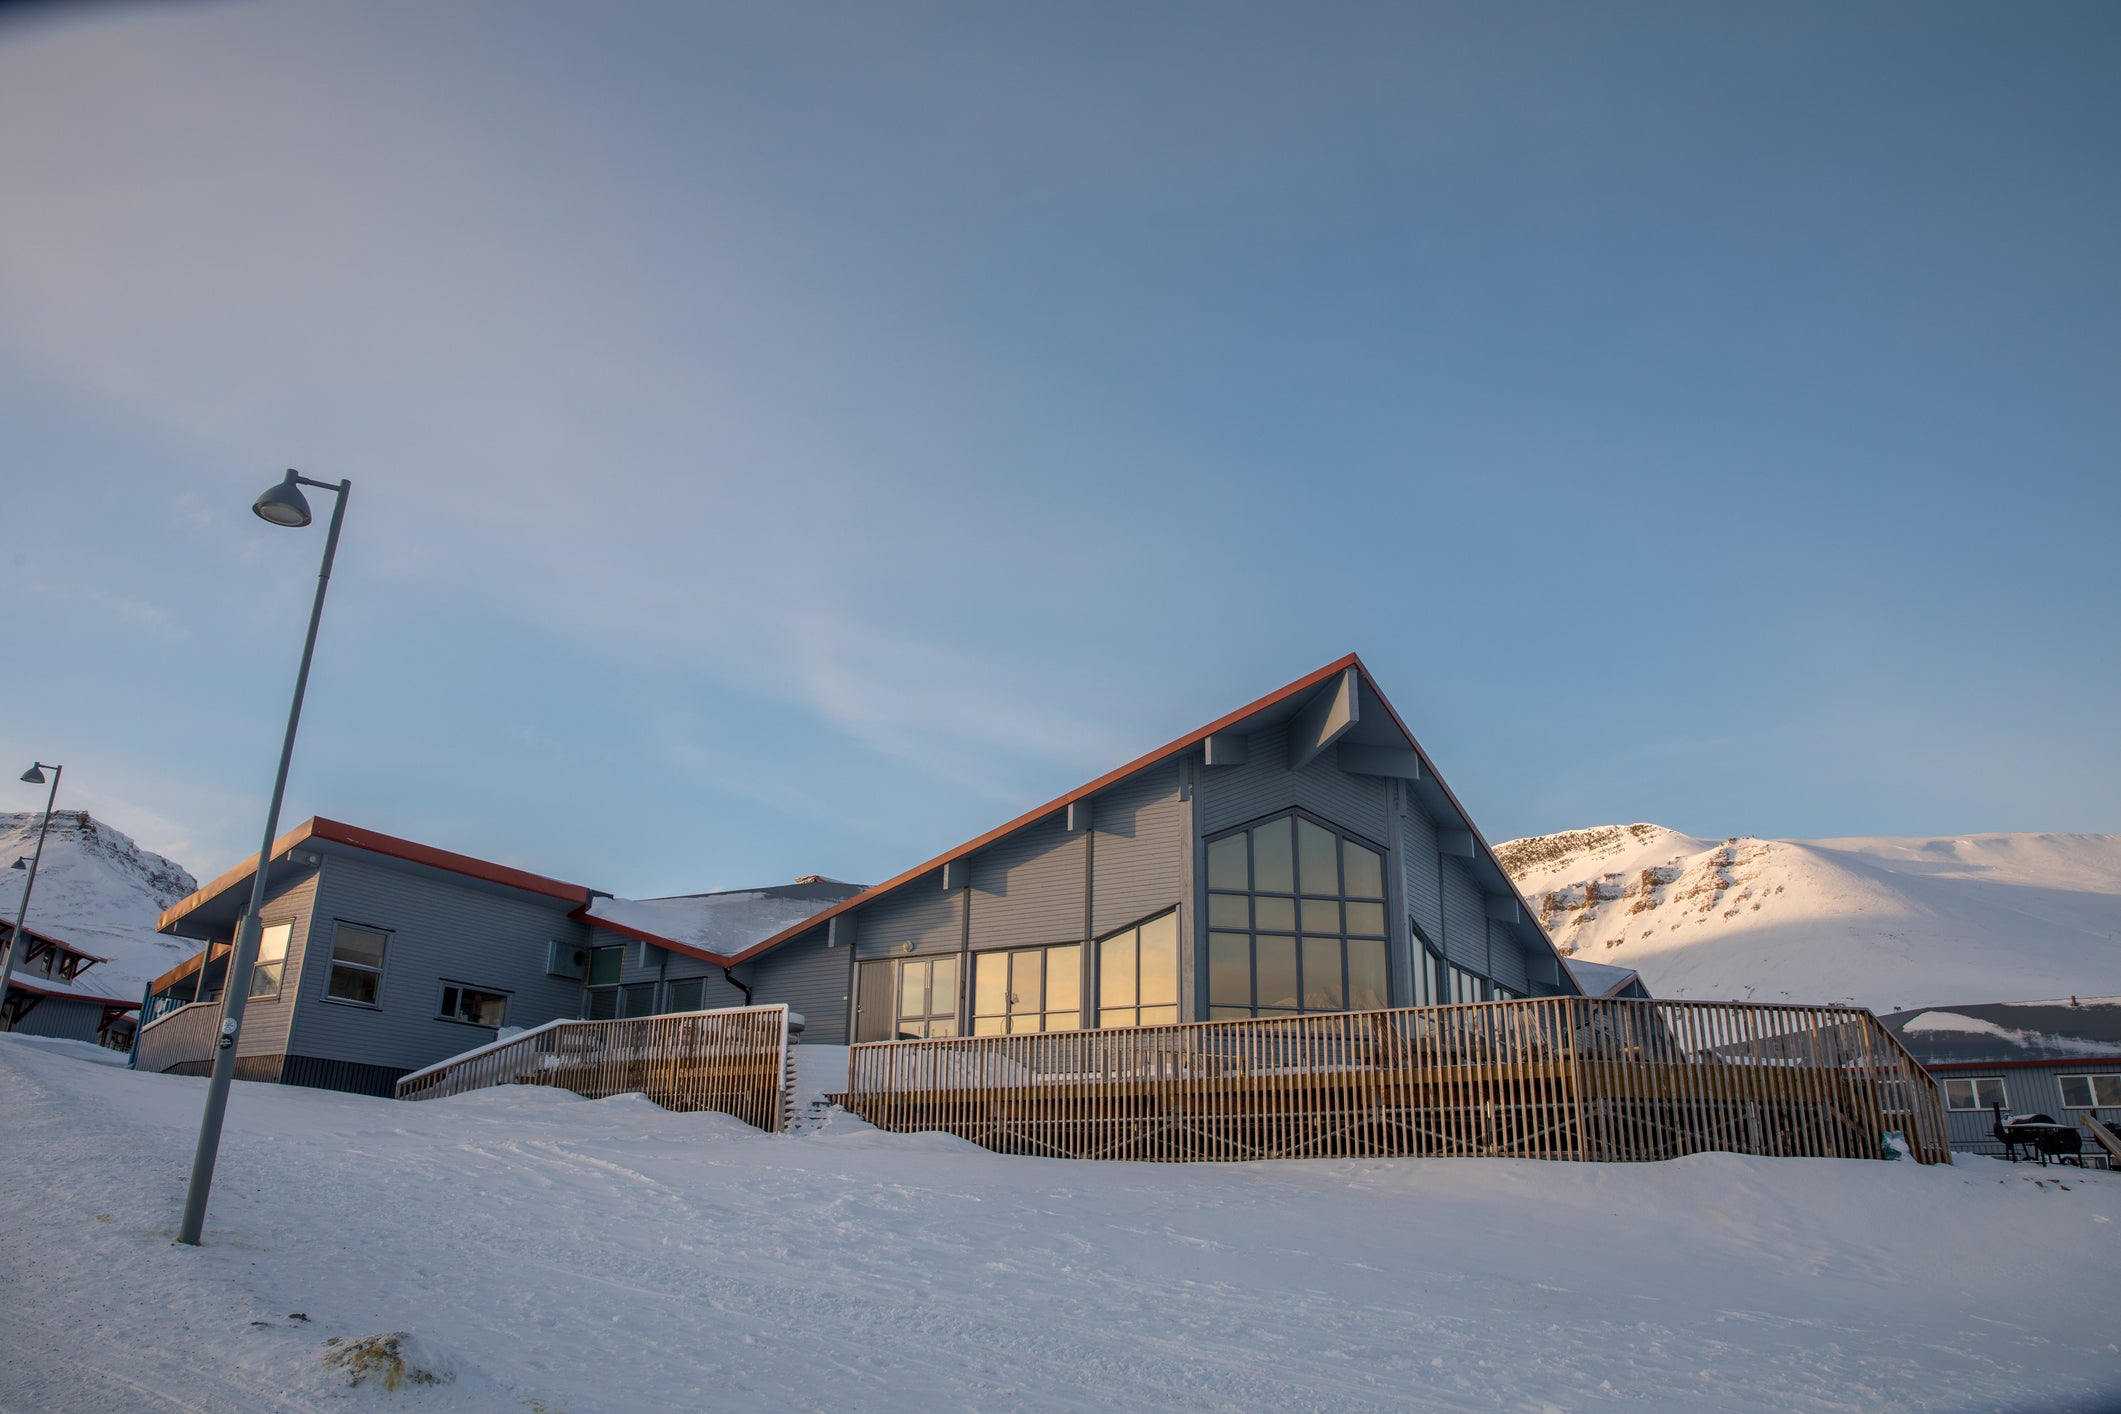 Longyearbyen, the world’s northernmost settlement, sits on the Norweigan island of Svalbard